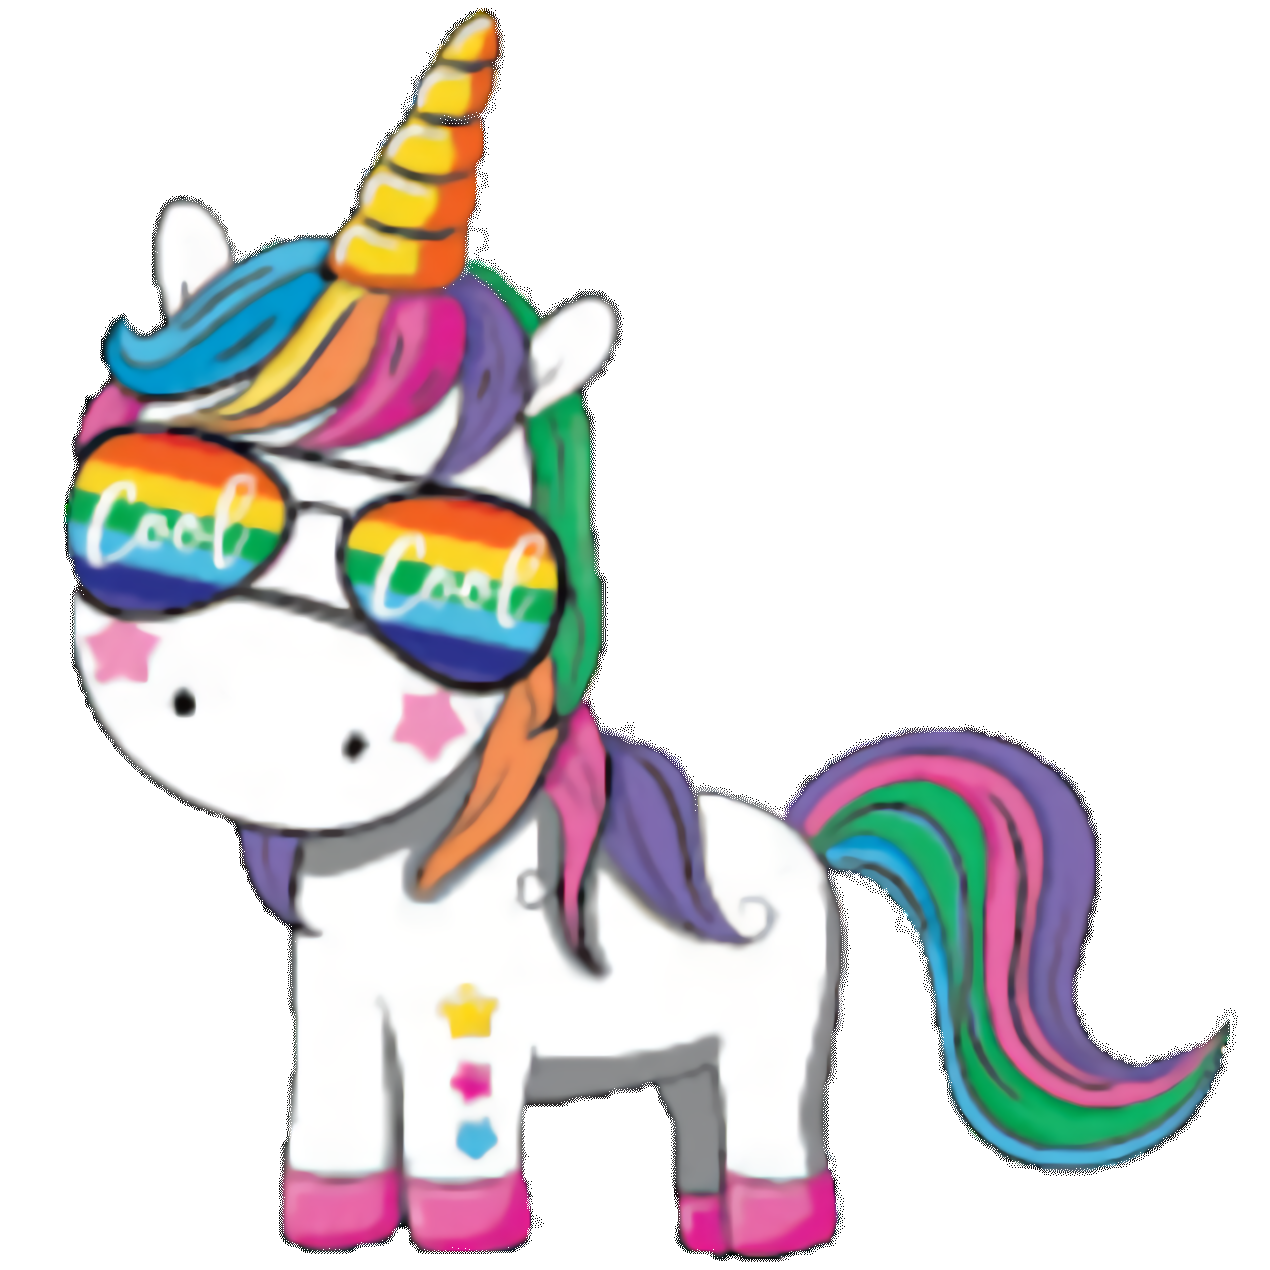 Unicorn (baby hip cool cool with sunglasses)